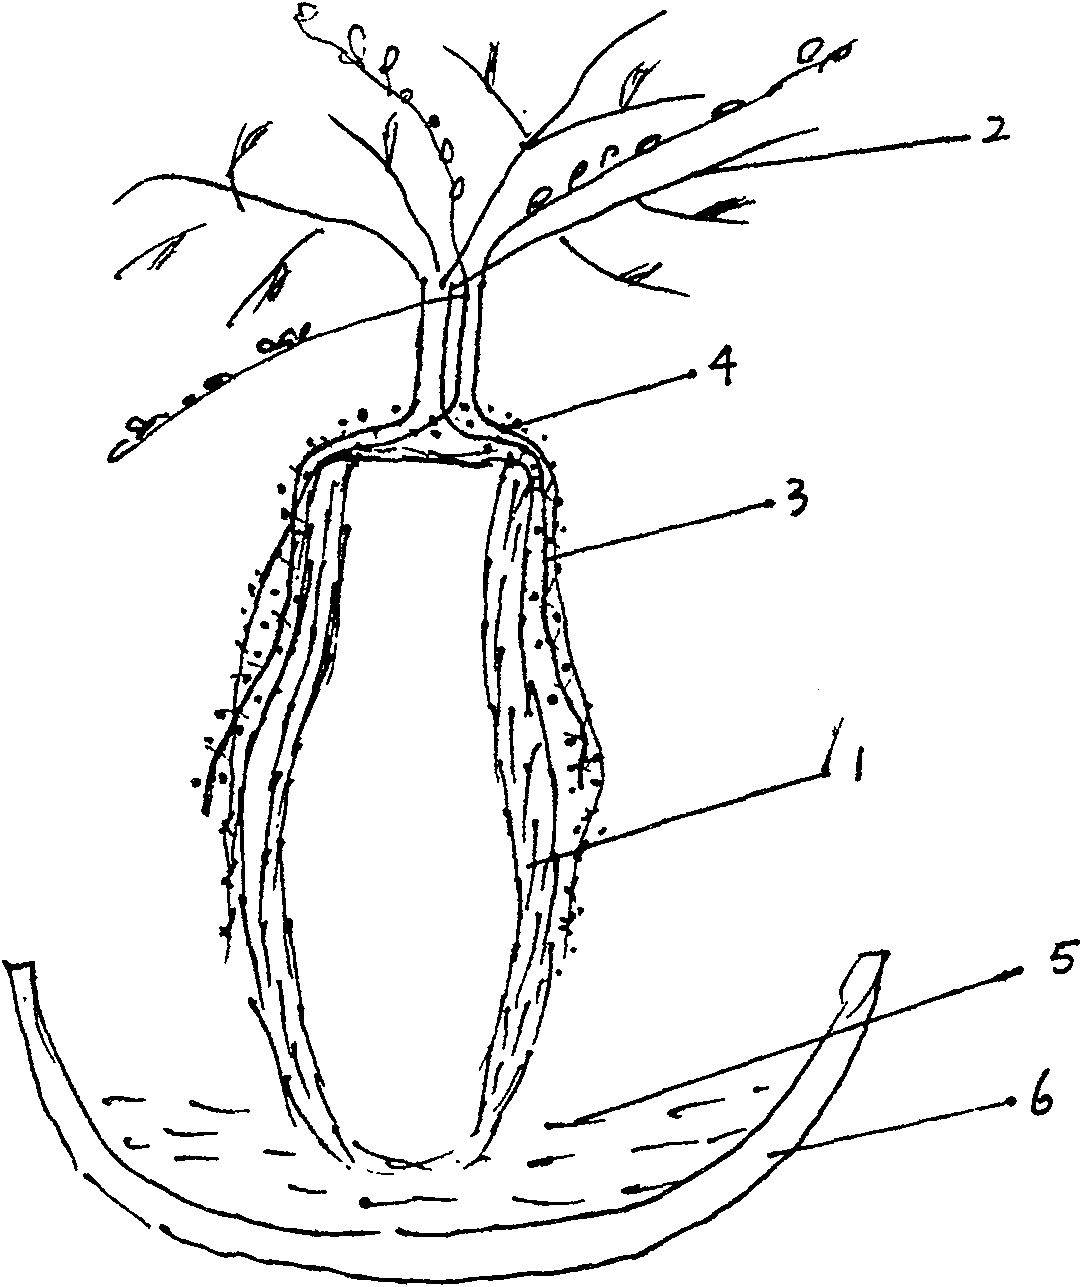 Method for quick cultivating art plant roots